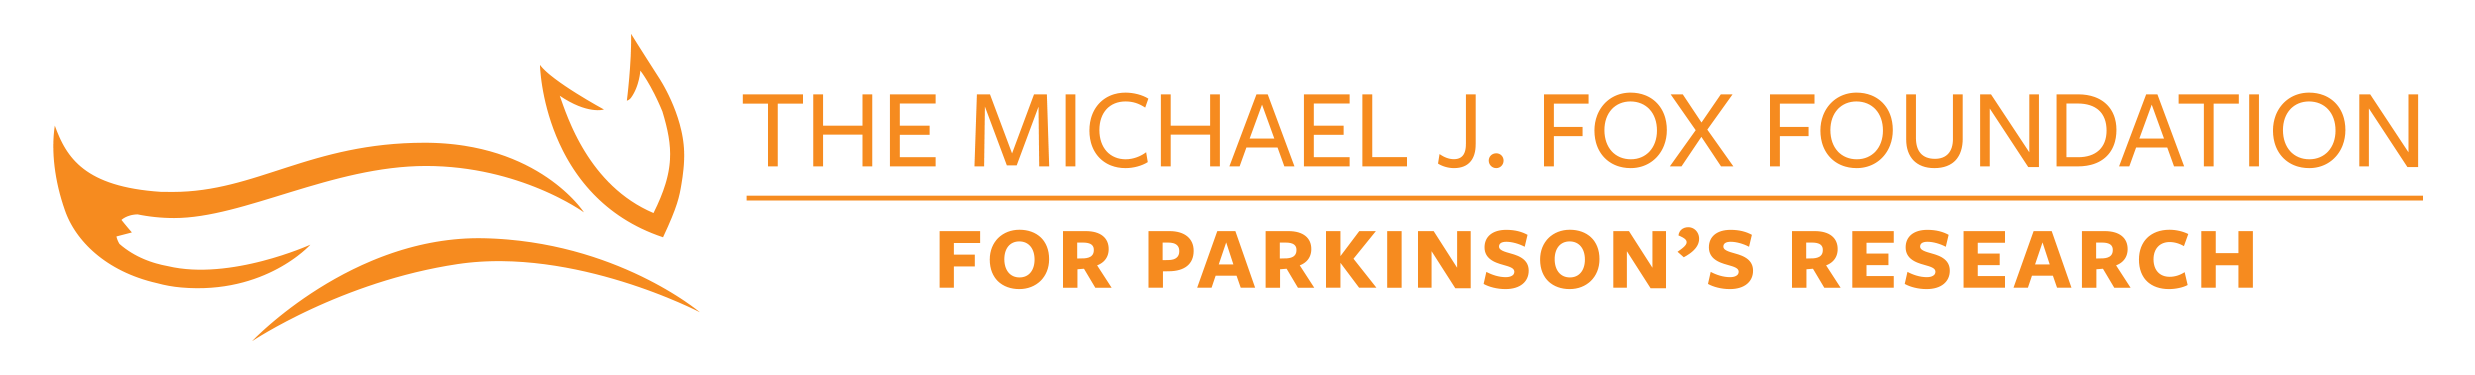 Go to the The Michael J. Fox Foundation donation page